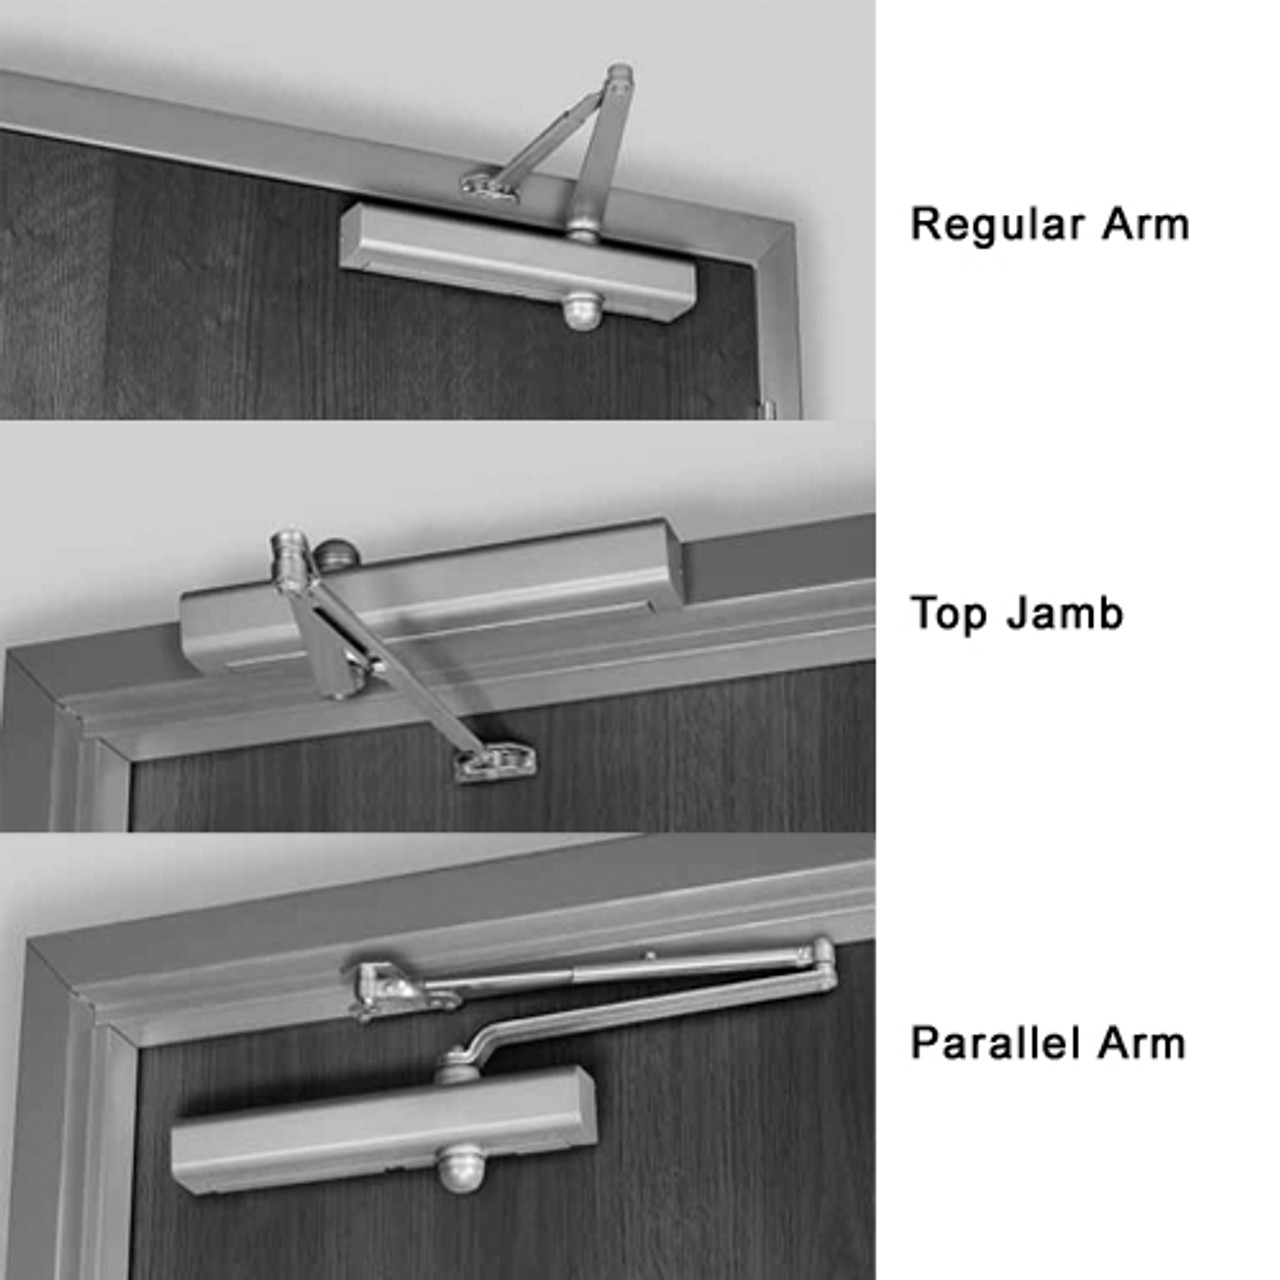 8501HDA-690 Norton 8000 Series Full Cover Hold Open Door Closers with Regular Parallel and Top Jamb to 2-3/4 inch Reveal in Statuary Bronze Finish